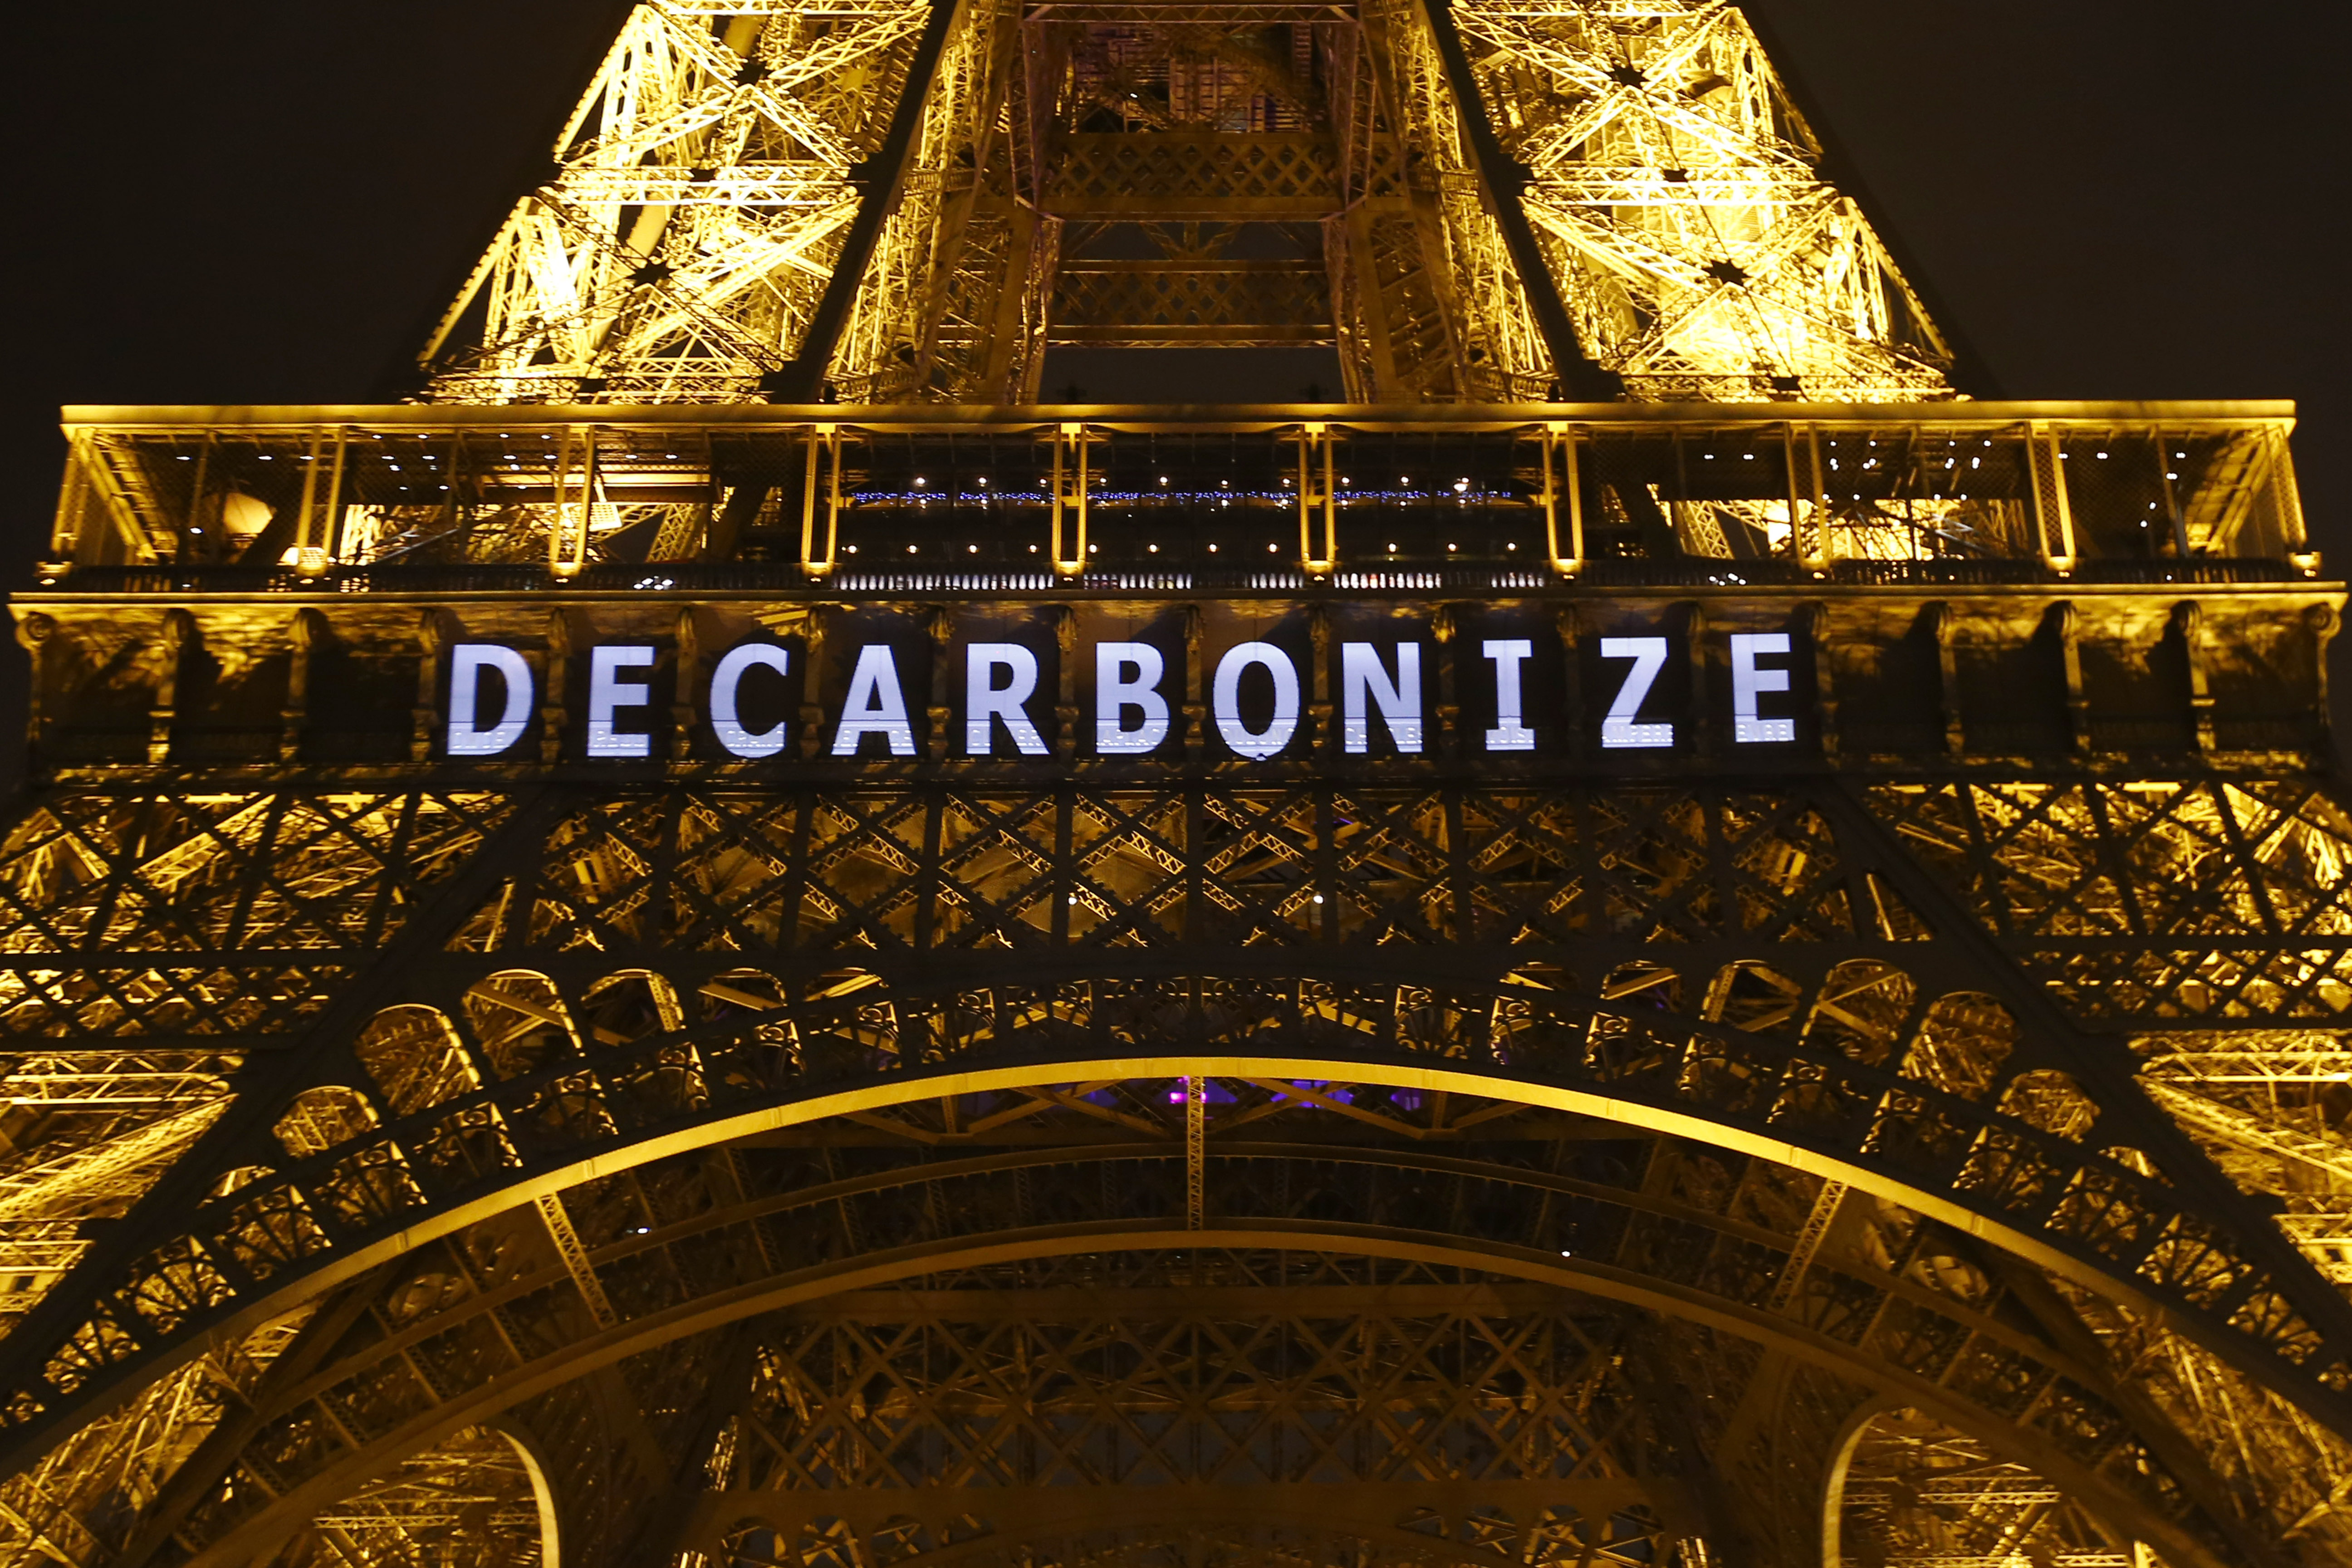 The slogan "DECARBONIZE" is projected on the Eiffel Tower as part of the COP21, United Nations Climate Change Conference in Paris, France, Friday, Dec. 11, 2015. (AP Photo/Francois Mori)